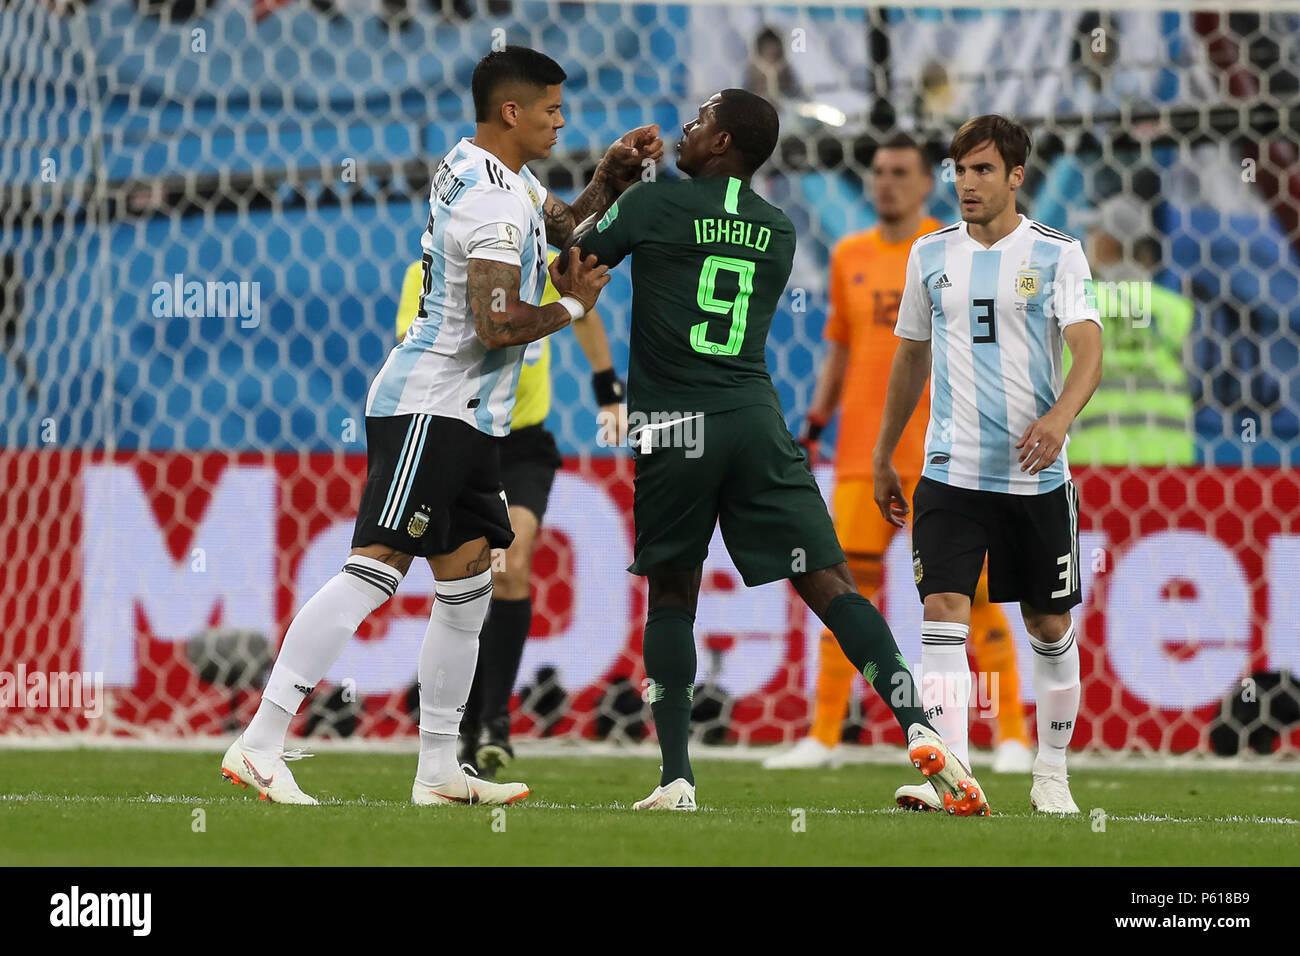 St Petersburg, Russia. 26th Jun, 2018. Marcos Rojo of Argentina and Odion Ighalo of Nigeria clash during the 2018 FIFA World Cup Group D match between Nigeria and Argentina at Saint Petersburg Stadium on June 26th 2018 in Saint Petersburg, Russia. (Photo by Daniel Chesterton/phcimages.com) Credit: PHC Images/Alamy Live News Stock Photo